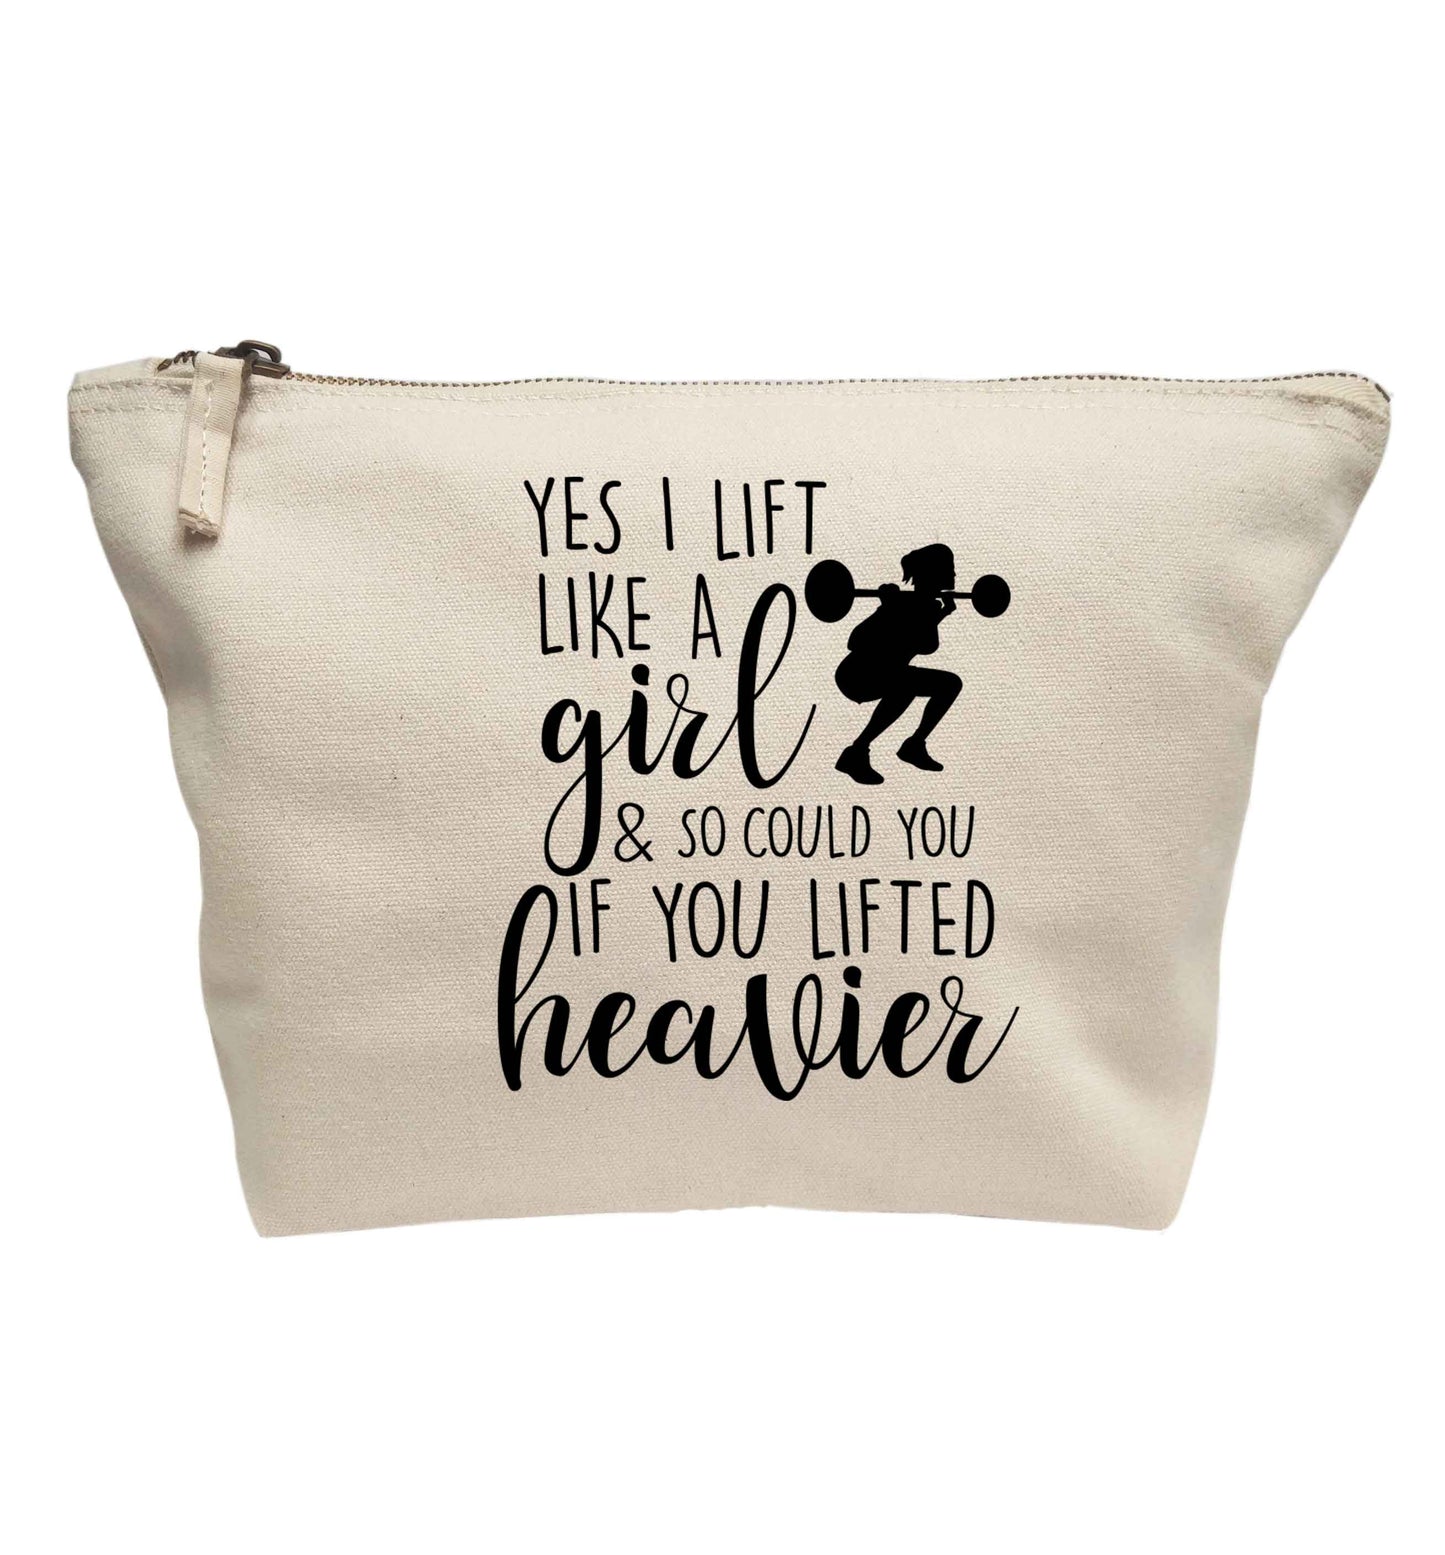 Yes I lift like a girl and so could you if you lifted heavier | makeup / wash bag